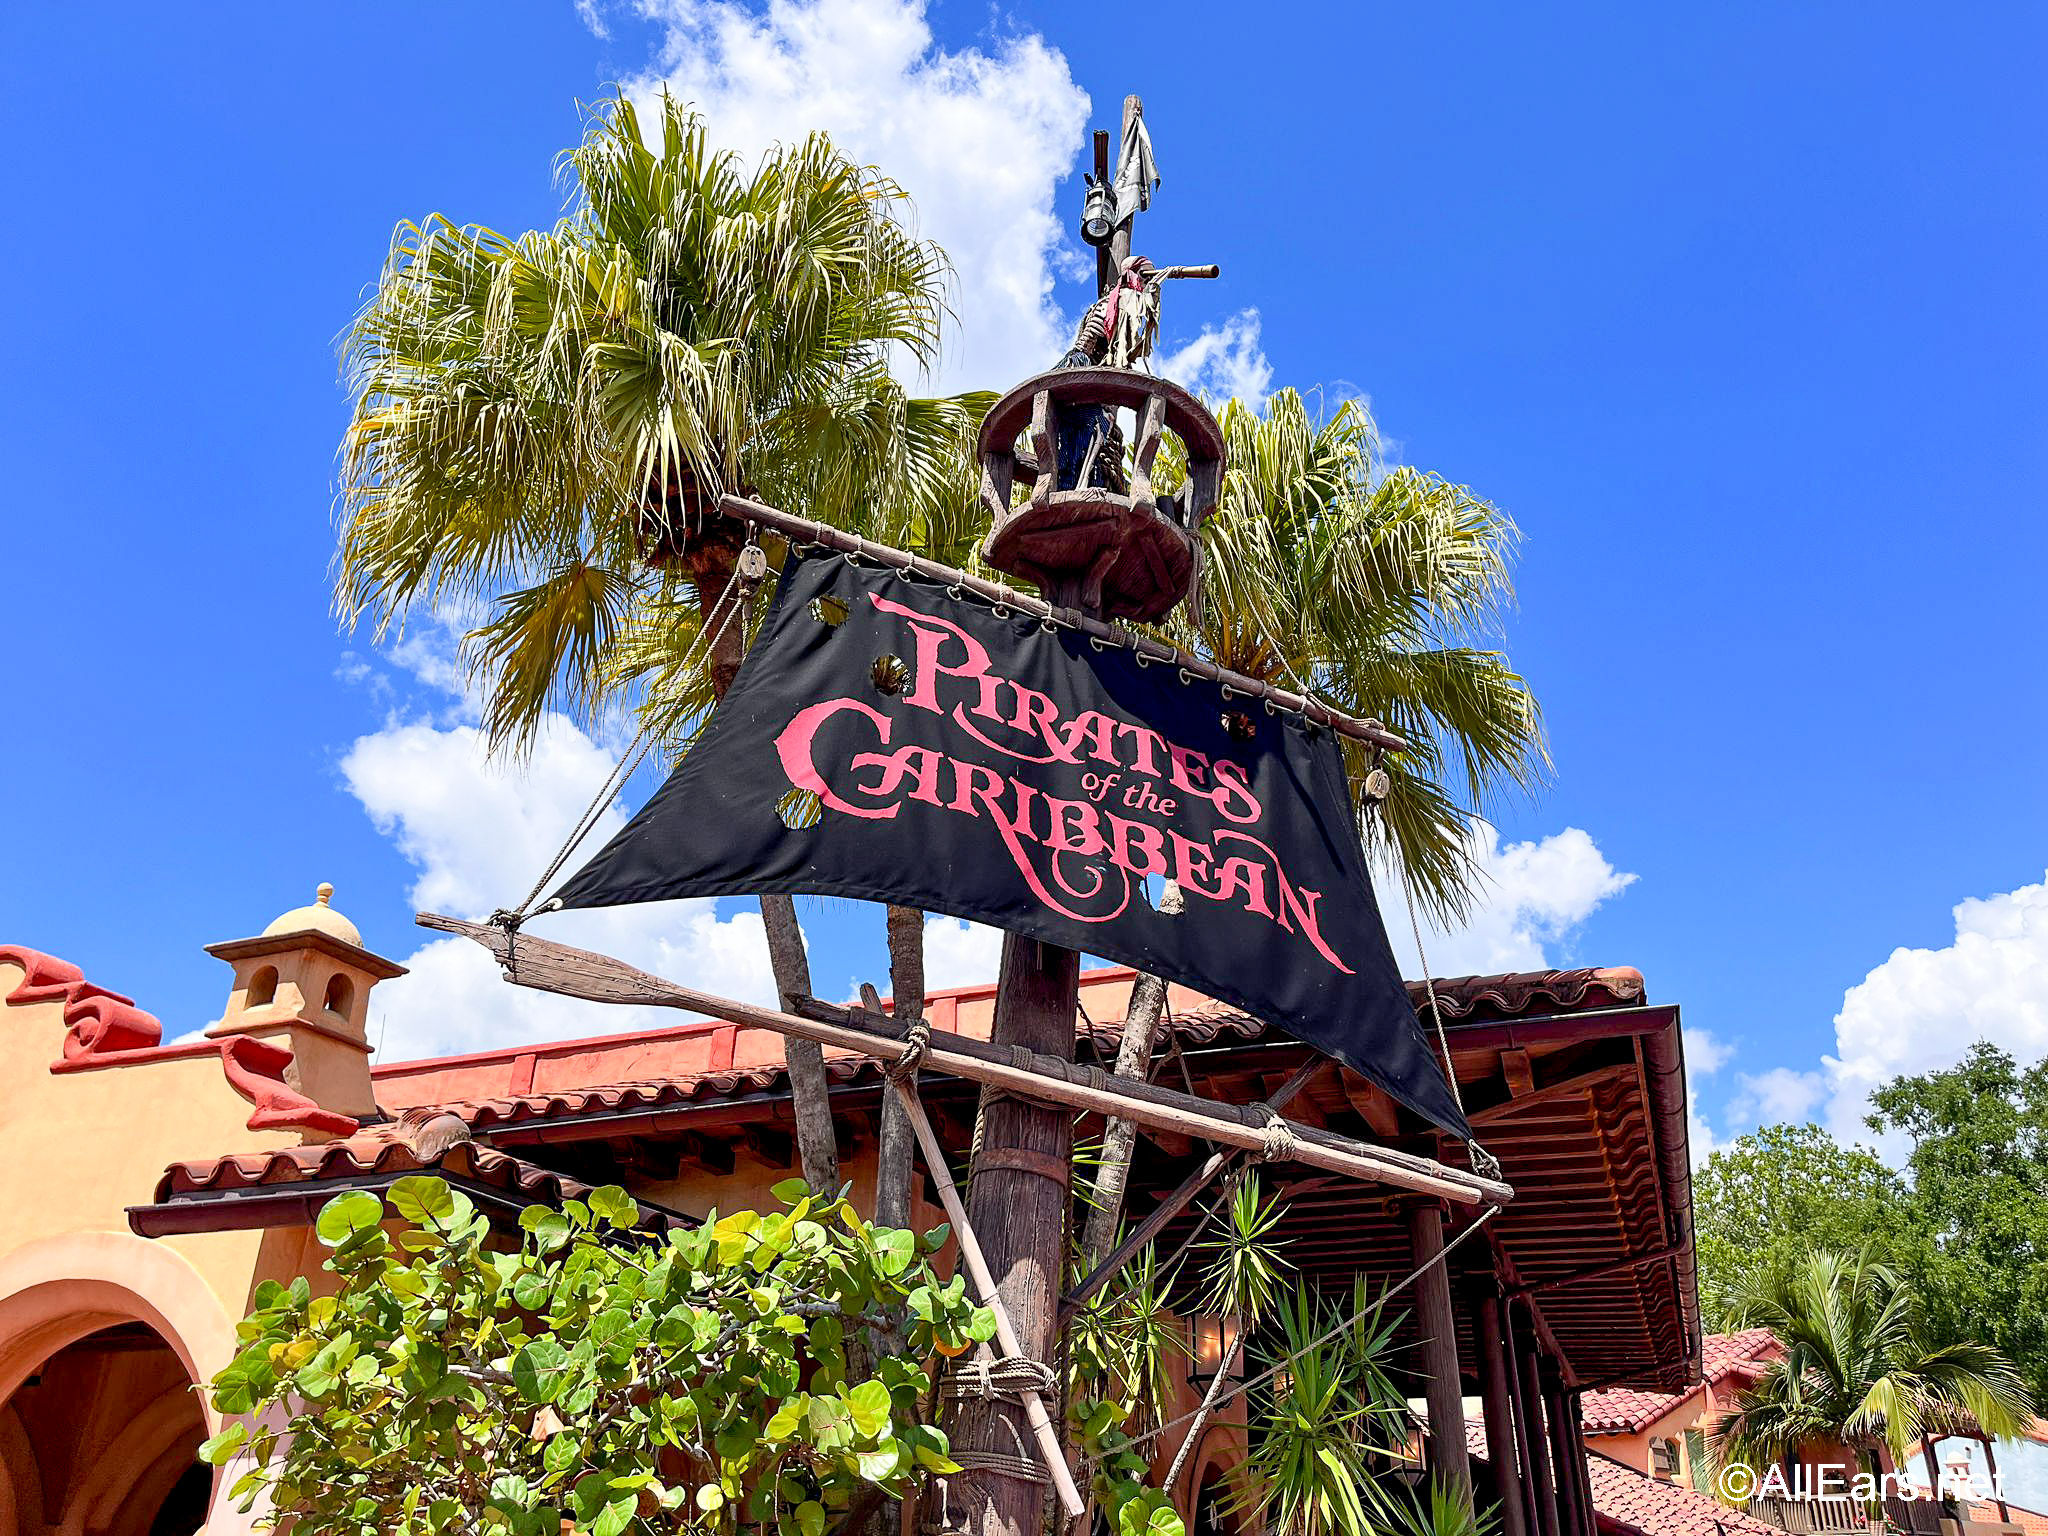 5 Things You Didn't Know About Pirates of the Caribbean in Disney World 